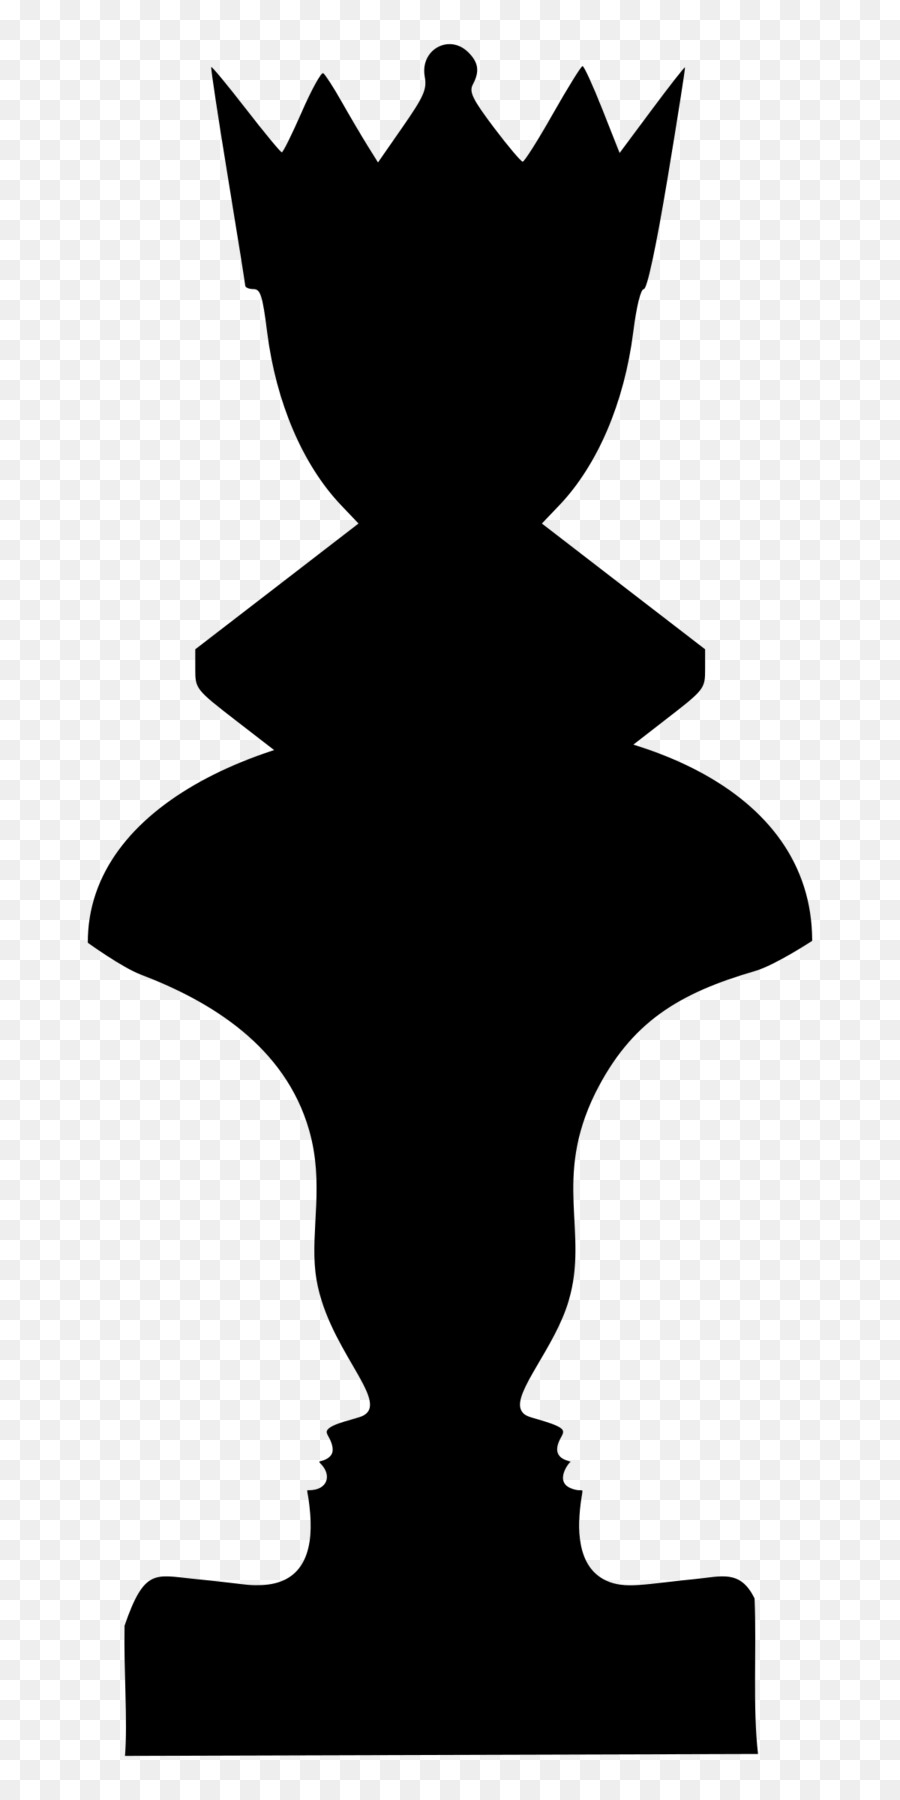 Half Chess Queen Chess piece Clip art - chess png download - 1200*2400 - Free Transparent Chess png Download.